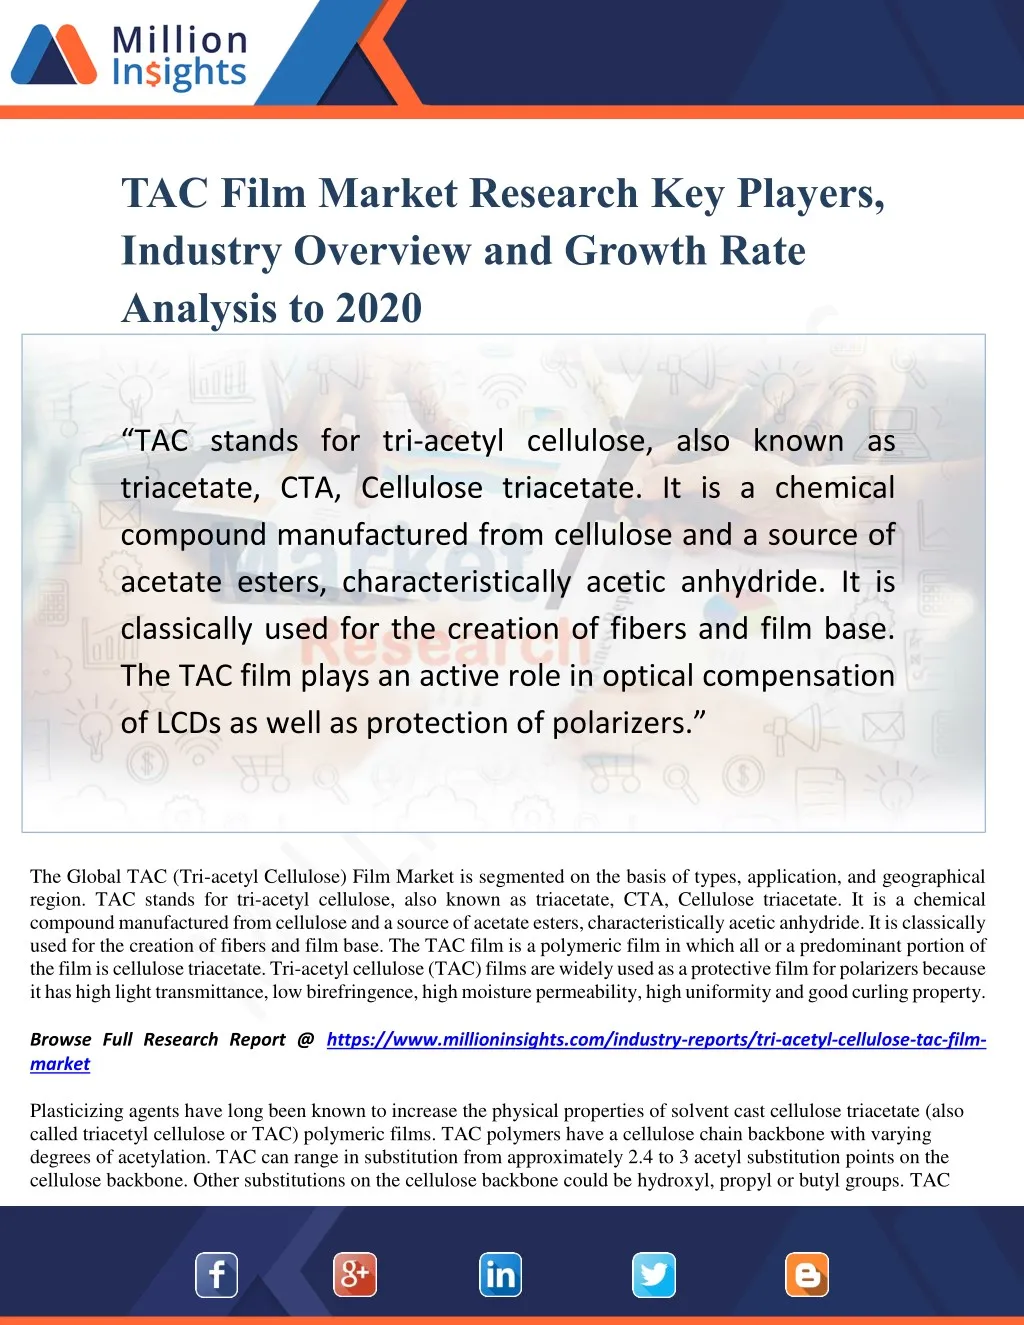 tac film market research key players industry